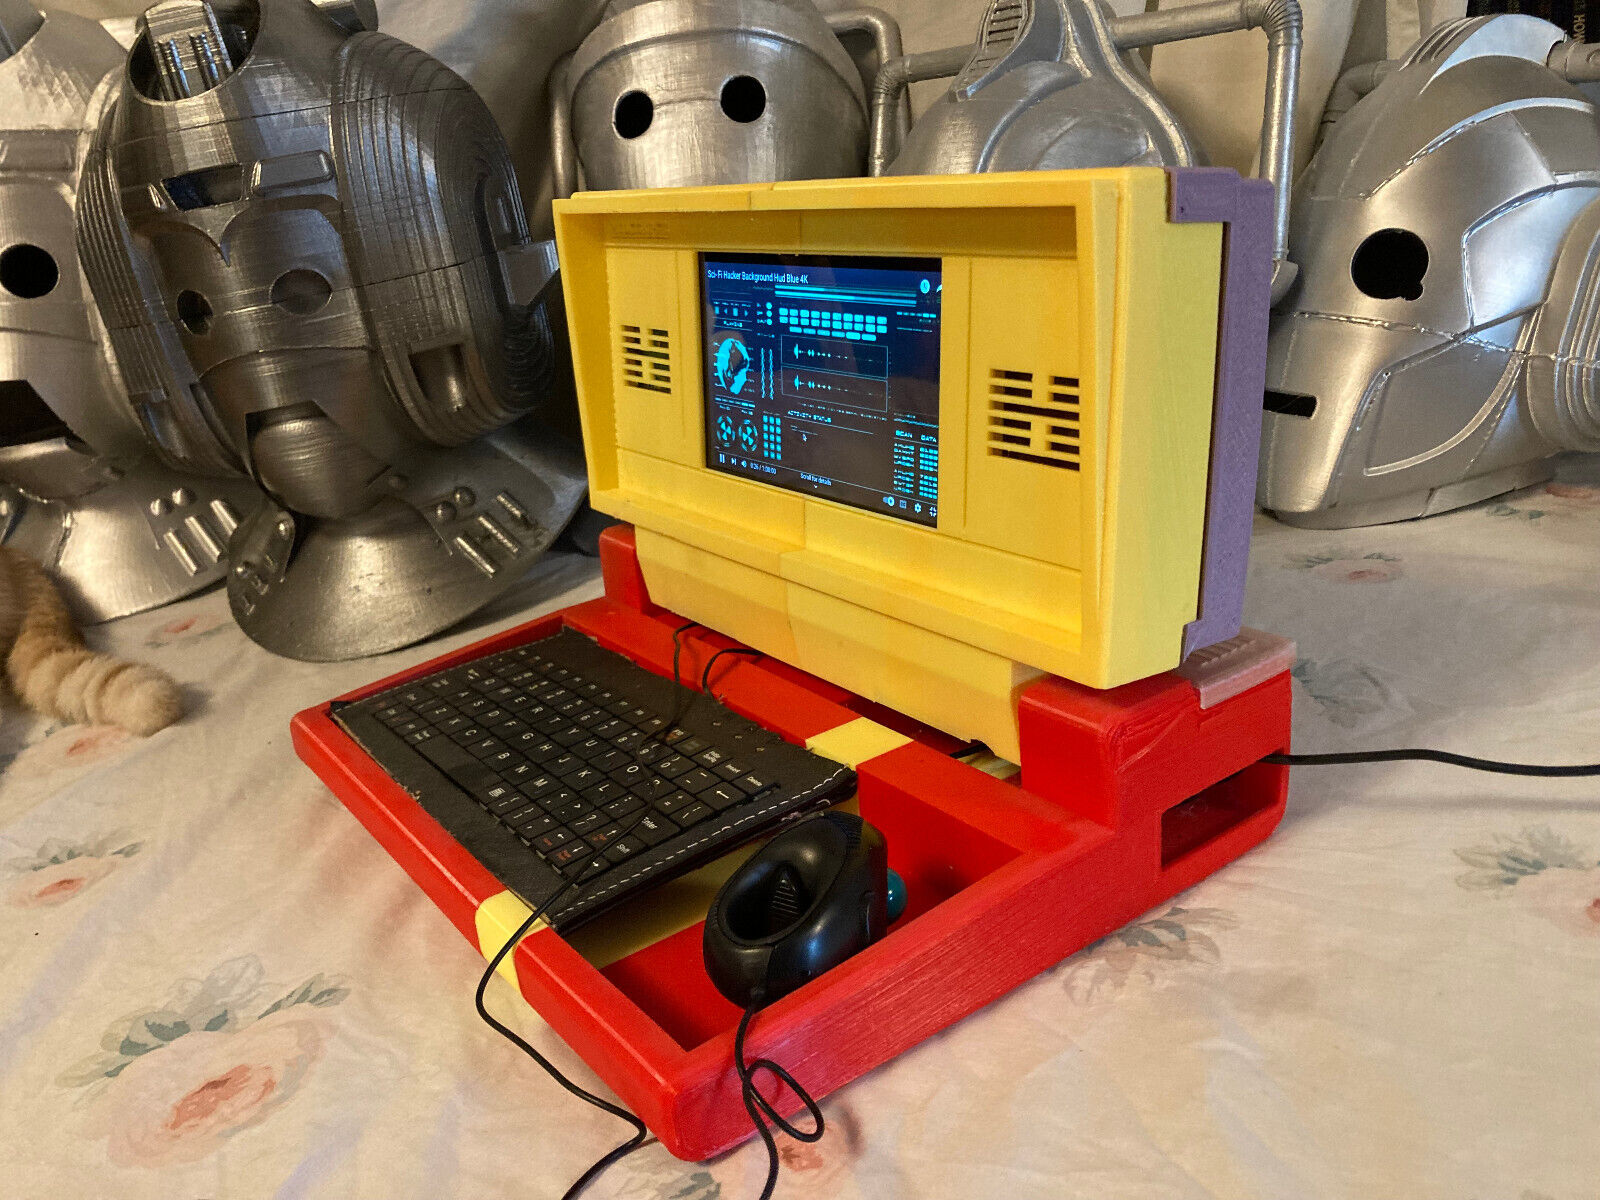 Custom Cyberdeck Cyber Deck laptop with raspbery pi, touchscreen 3D Printed case